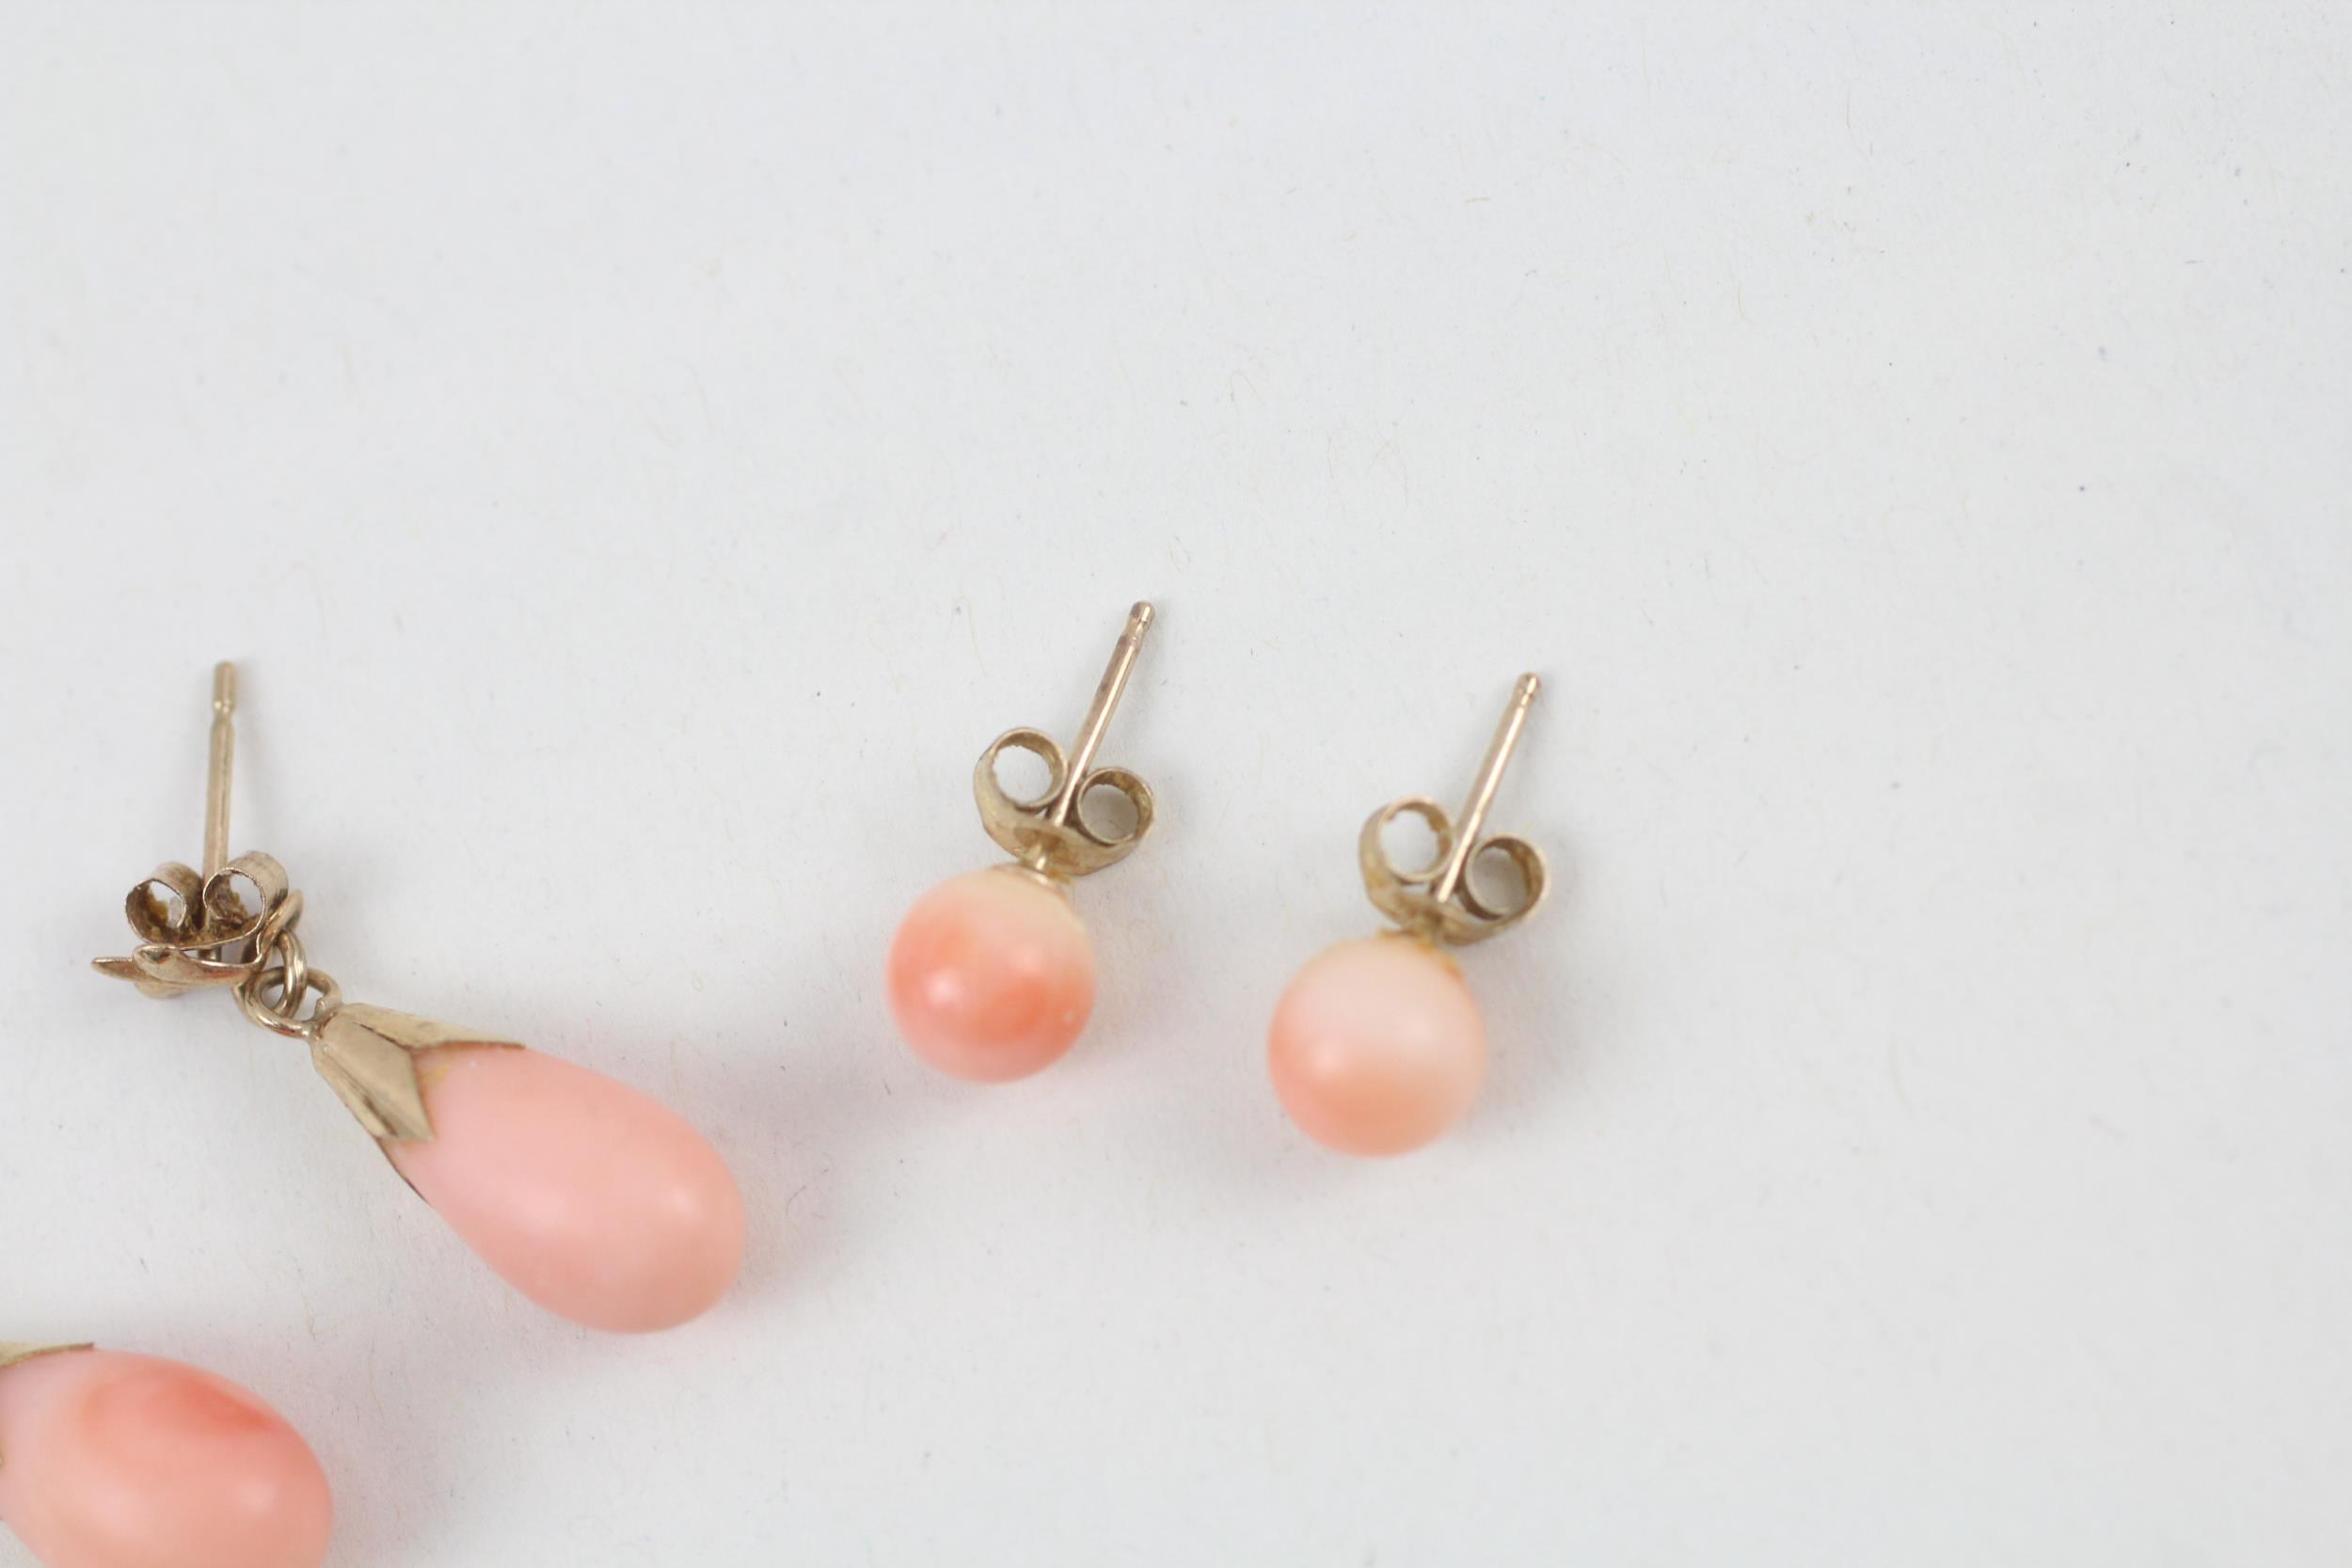 2 x 9ct gold coral set earrings, drops and studs 2.5 g - Image 3 of 5